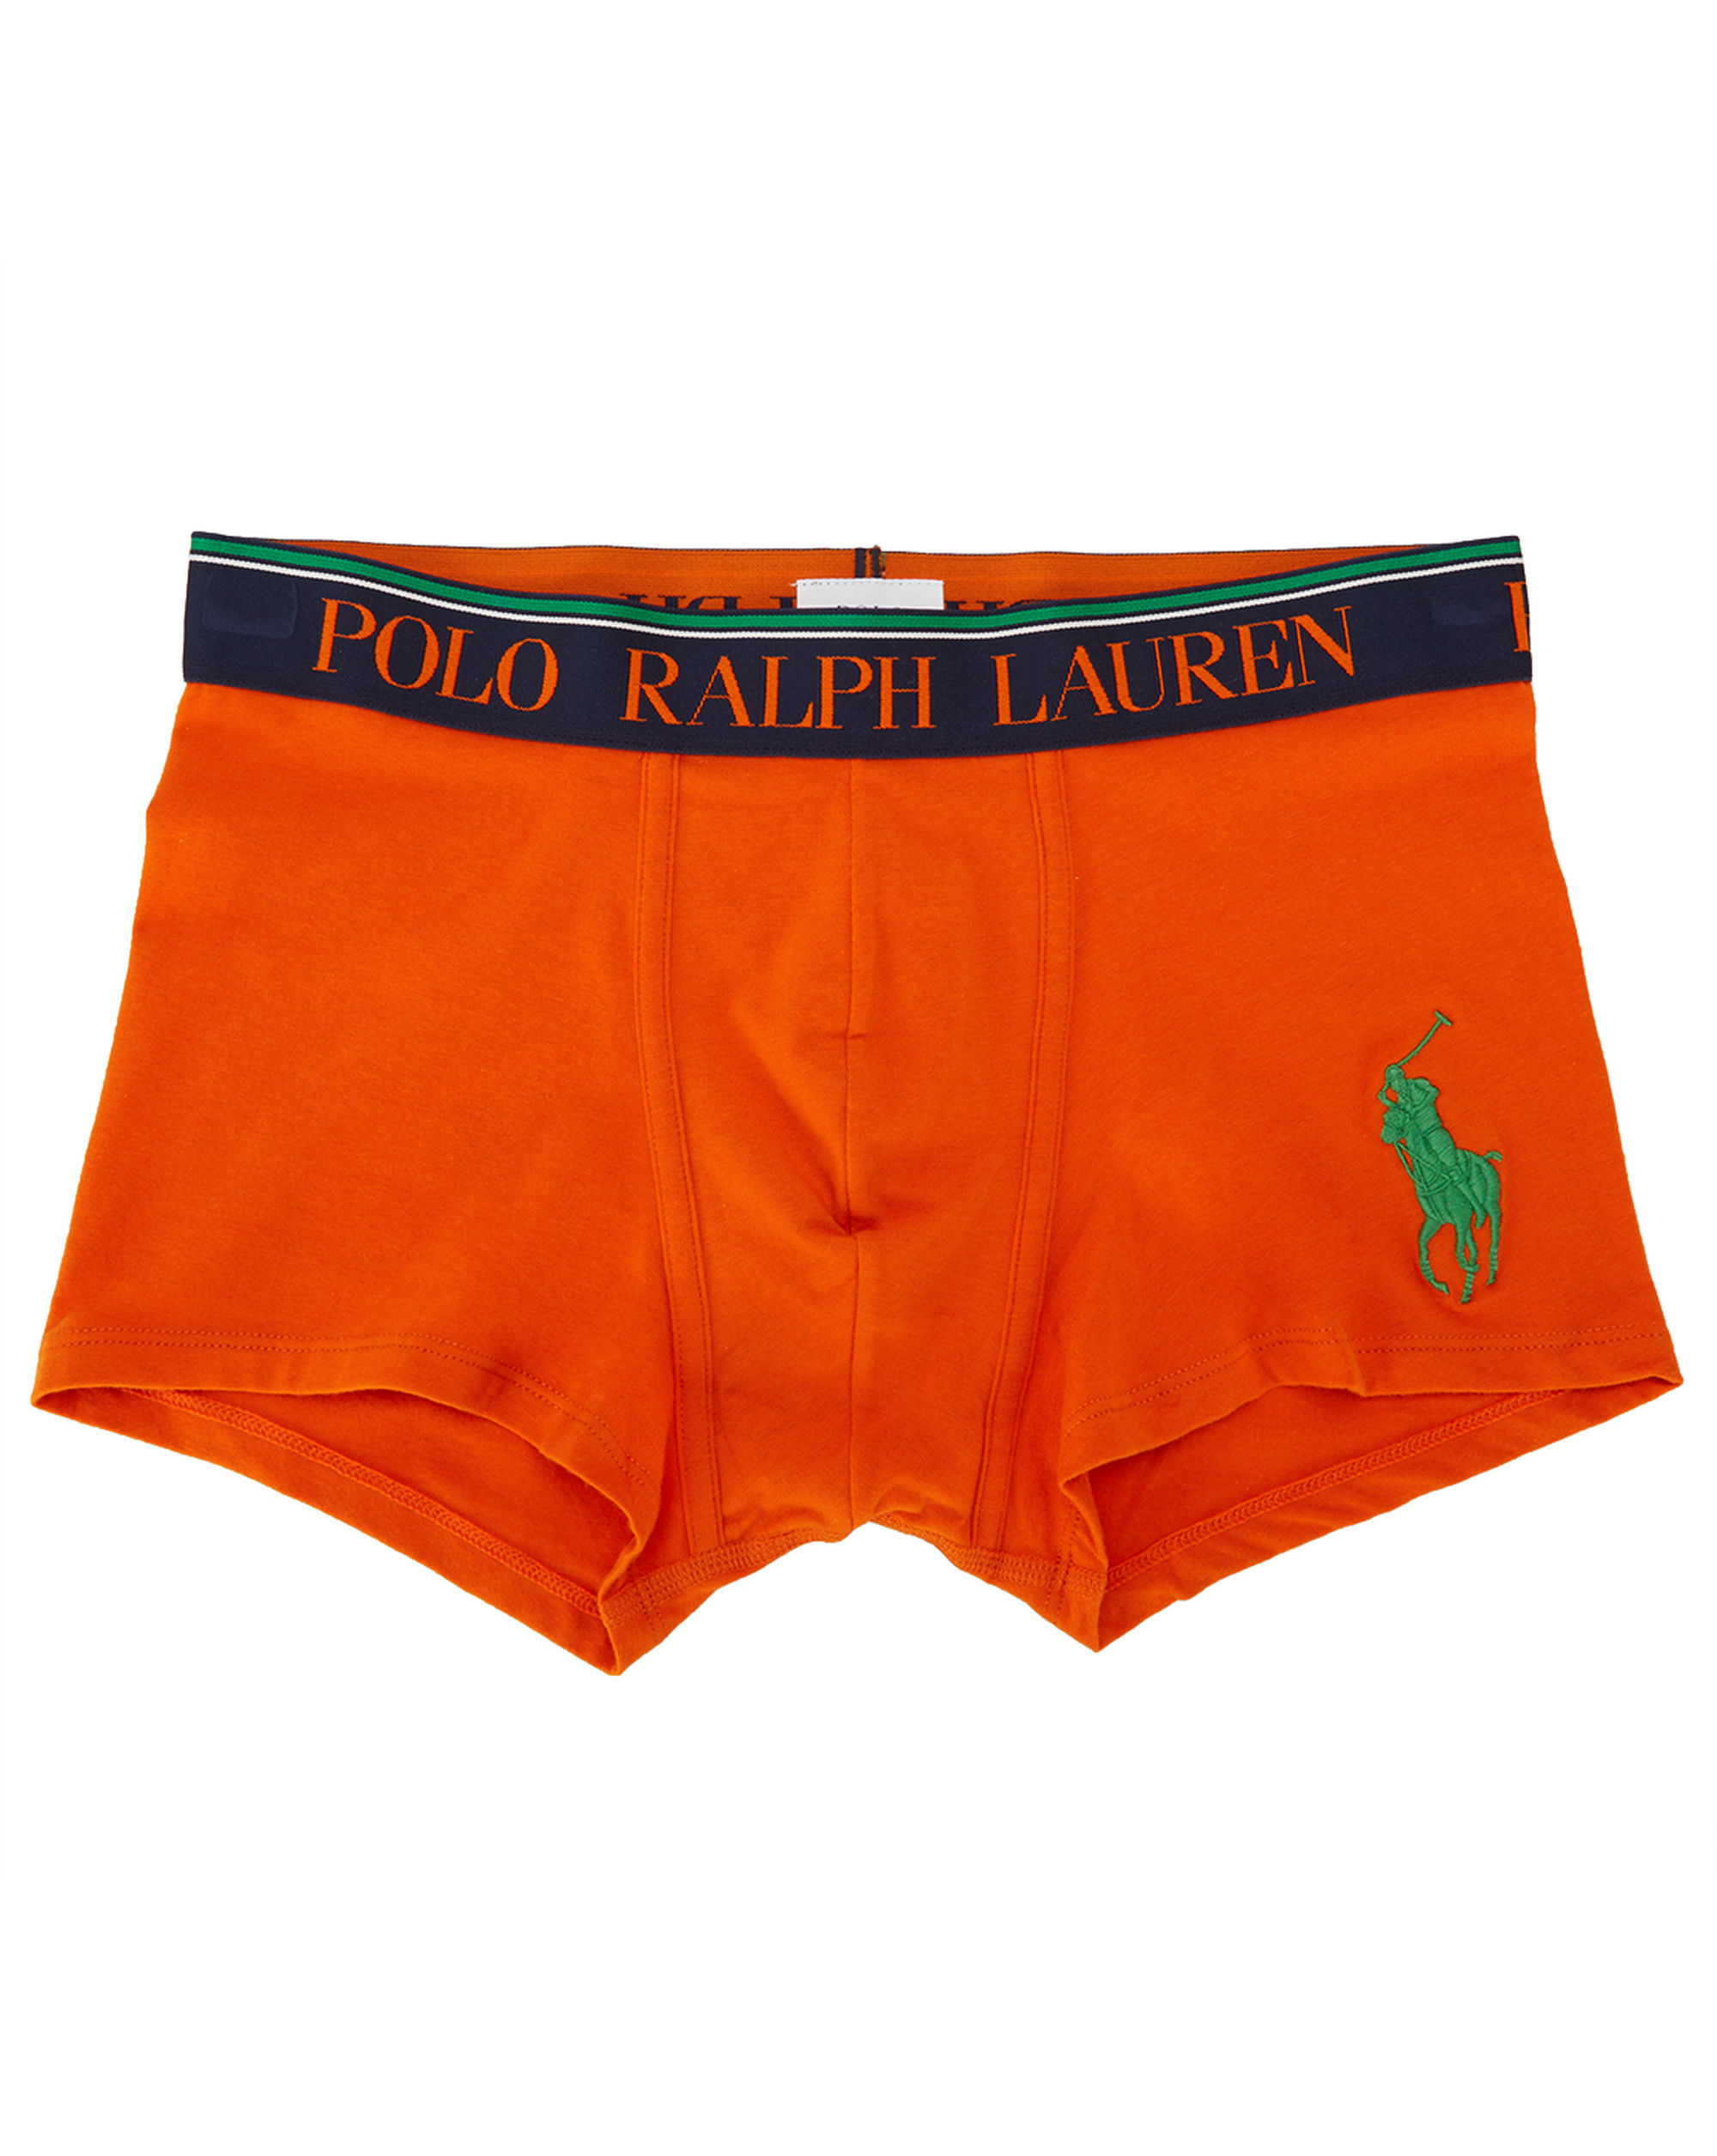 Polo ralph lauren Orange Boxer Shorts With Striped Waistband in Gray ...